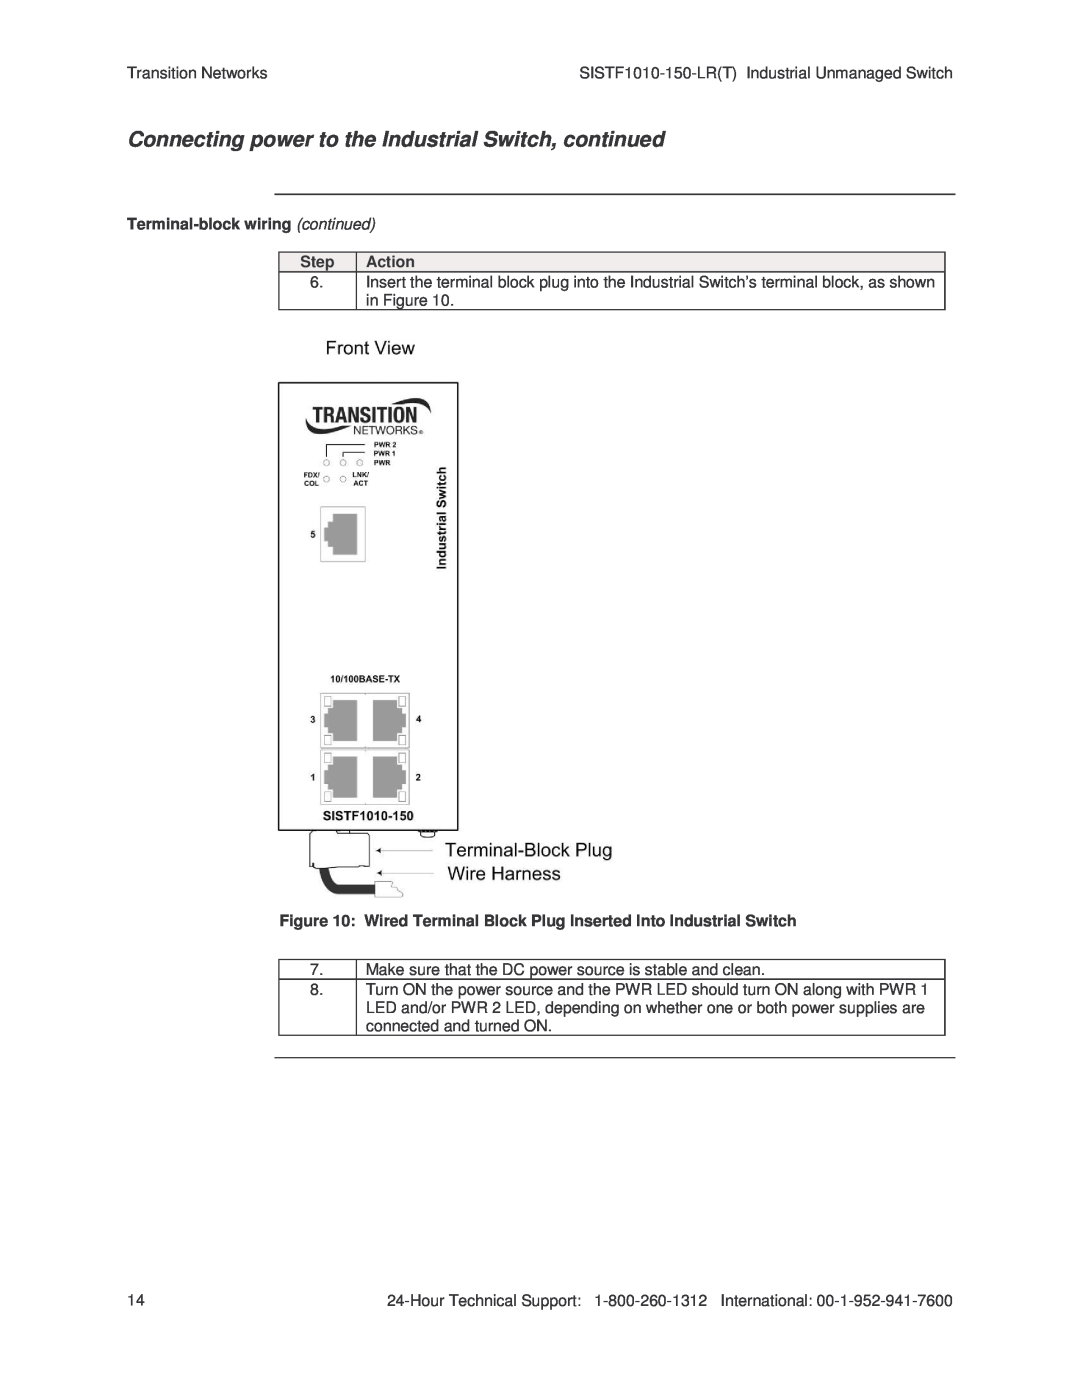 Transition Networks SISTF1010-150-LR(T) installation manual Connecting power to the Industrial Switch, continued 